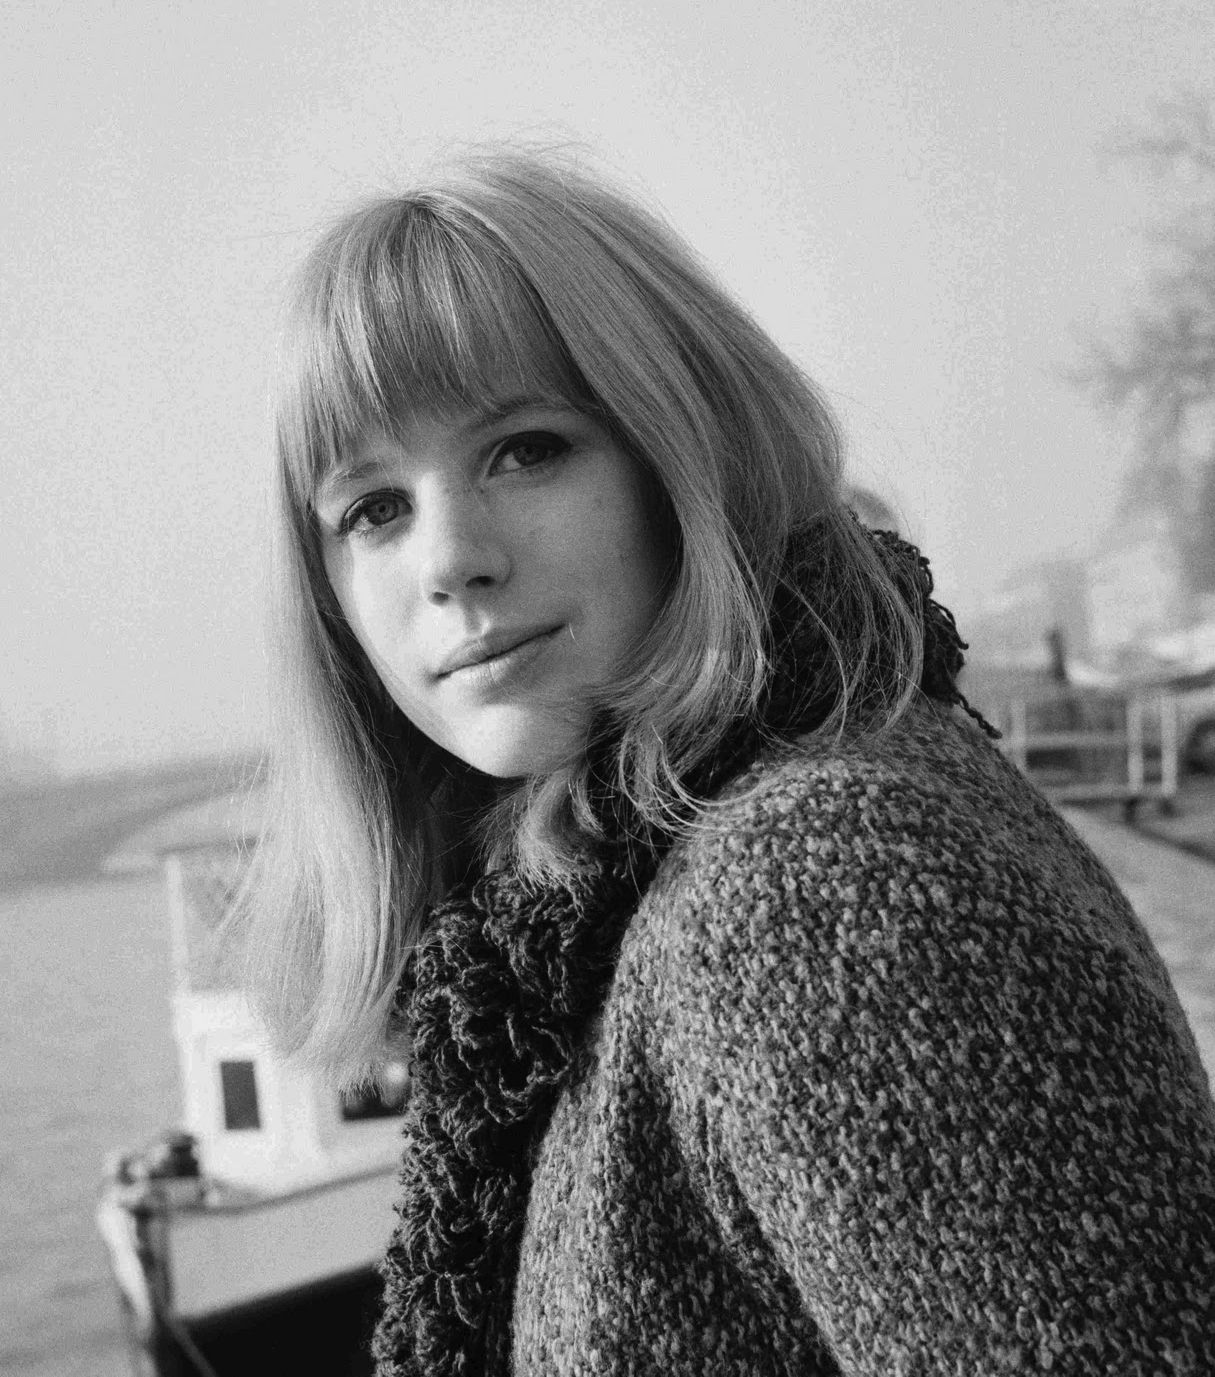 Pictures of Marianne Faithfull